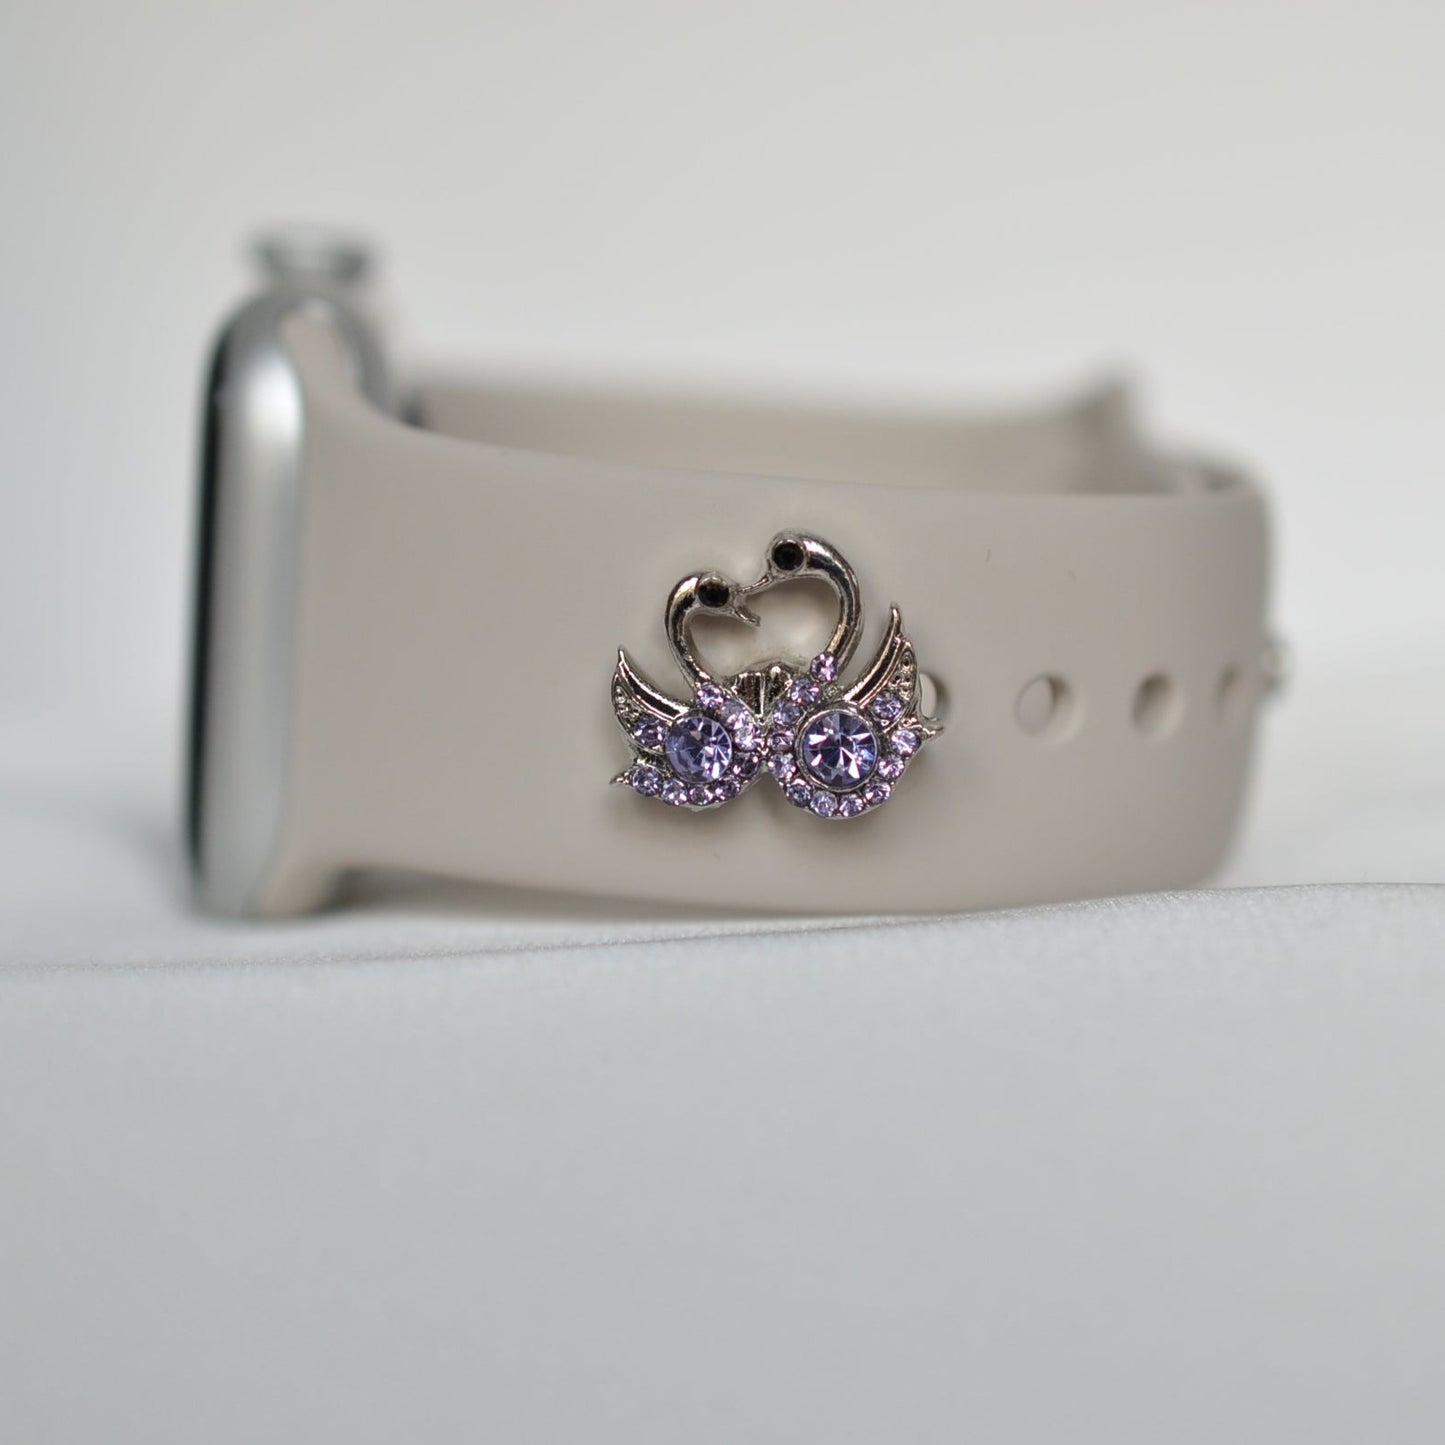 Purple Swan Charm for Belts, Bags and Watch Bands